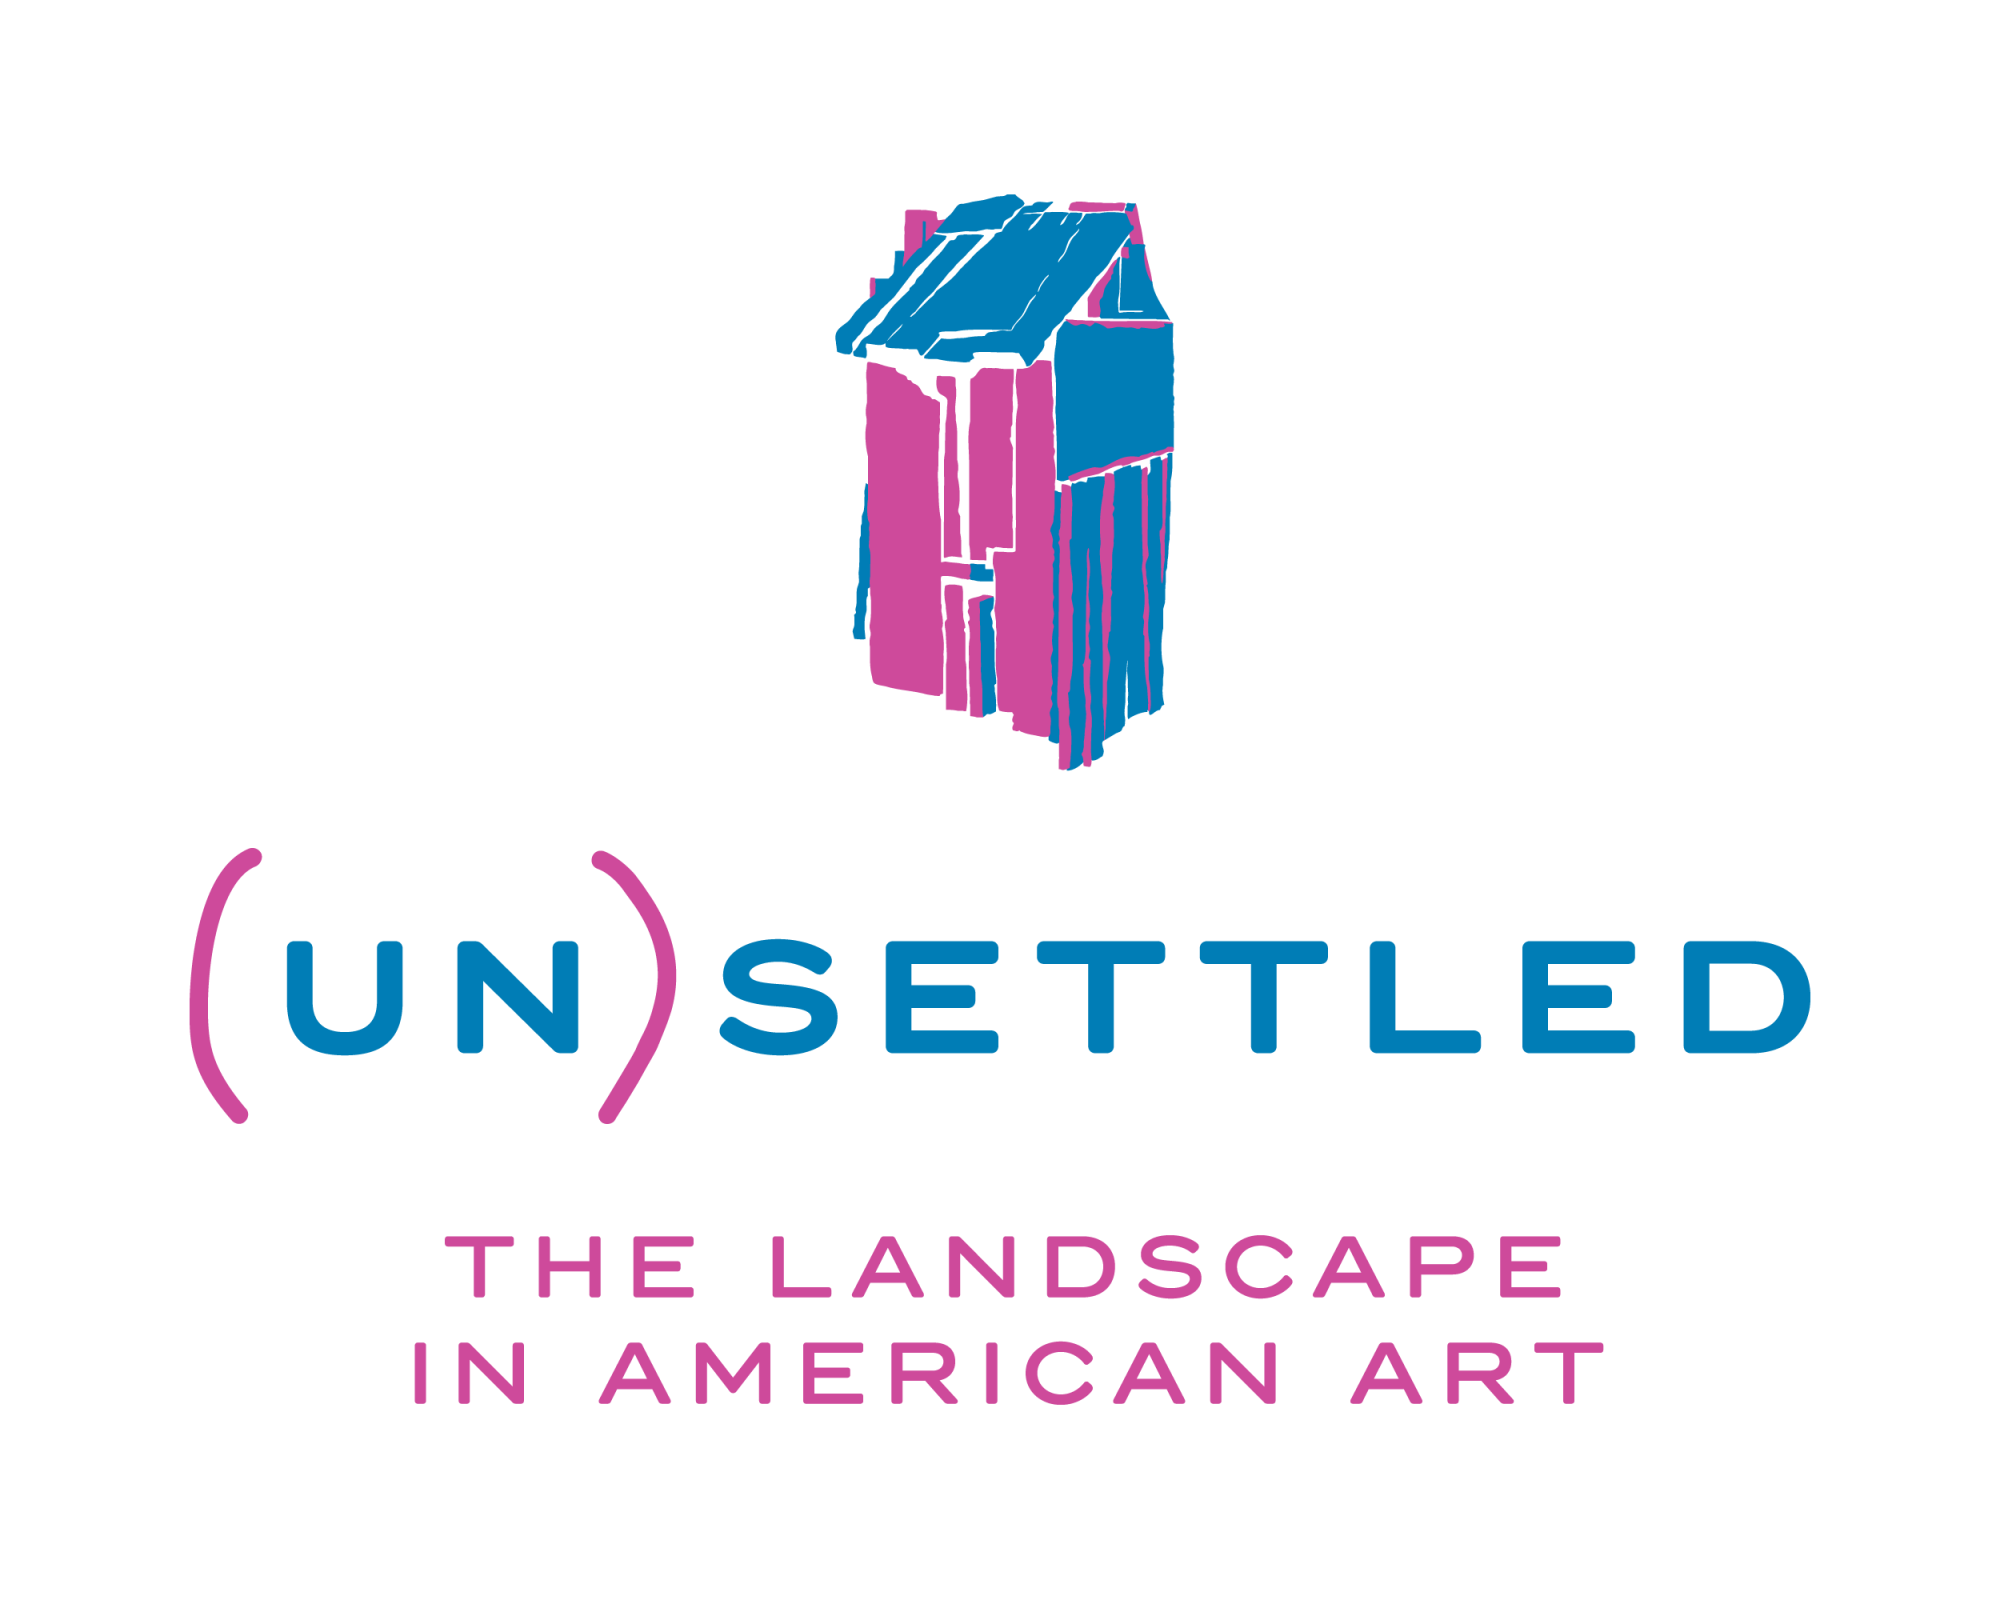 UnSettled exhibition in bright blue and pink including a dilapidated looking cabin